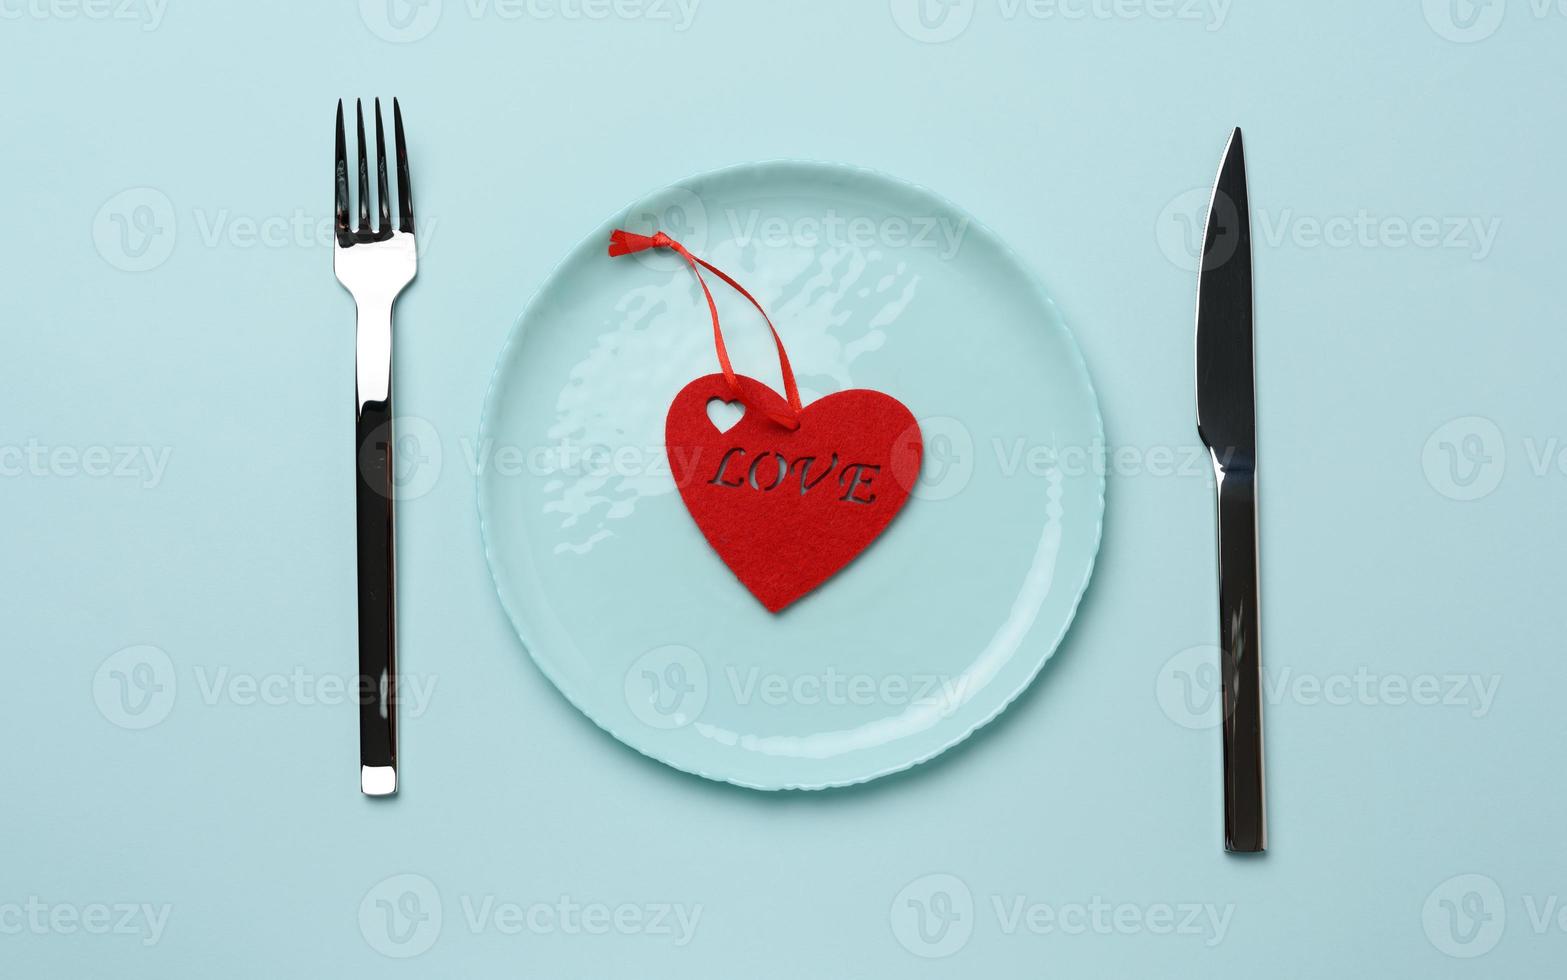 red heart lies in a blue round ceramic plate photo